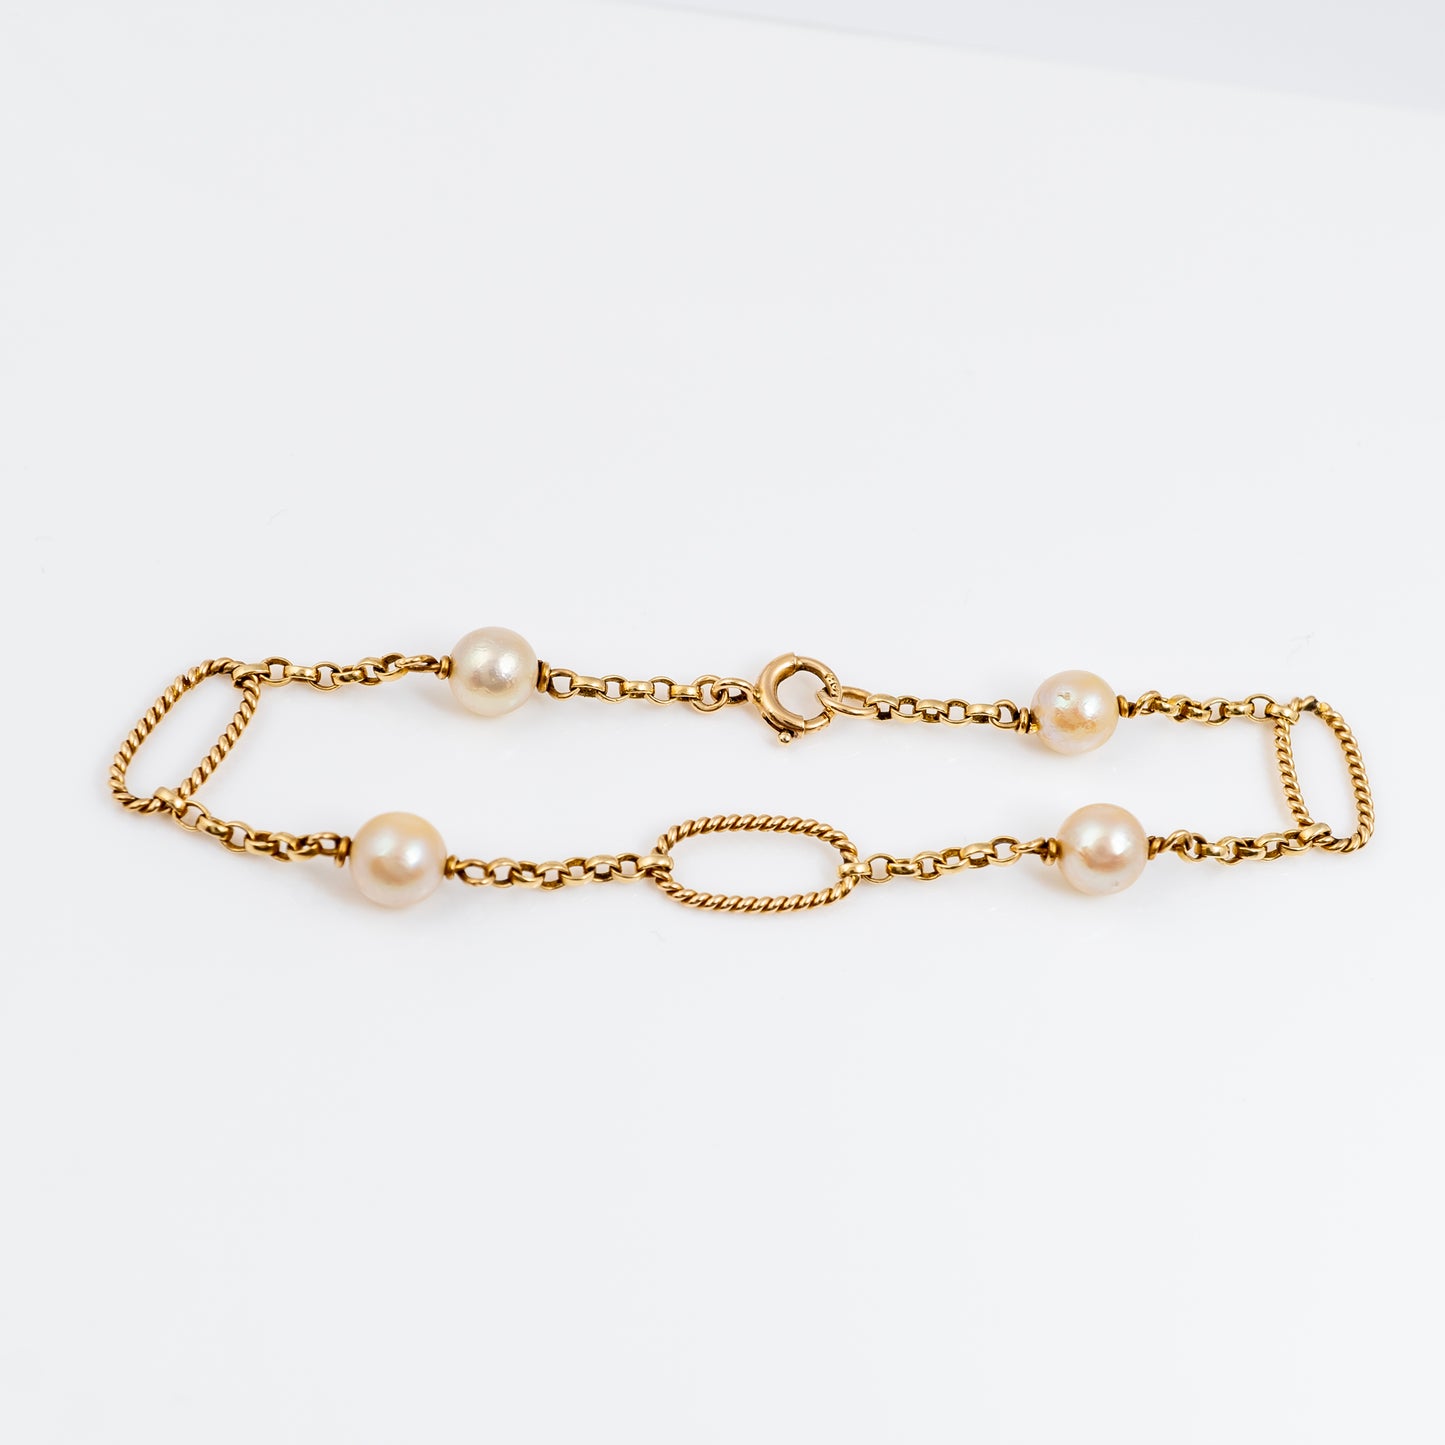 9ct gold pear bracelet 17.5 inches